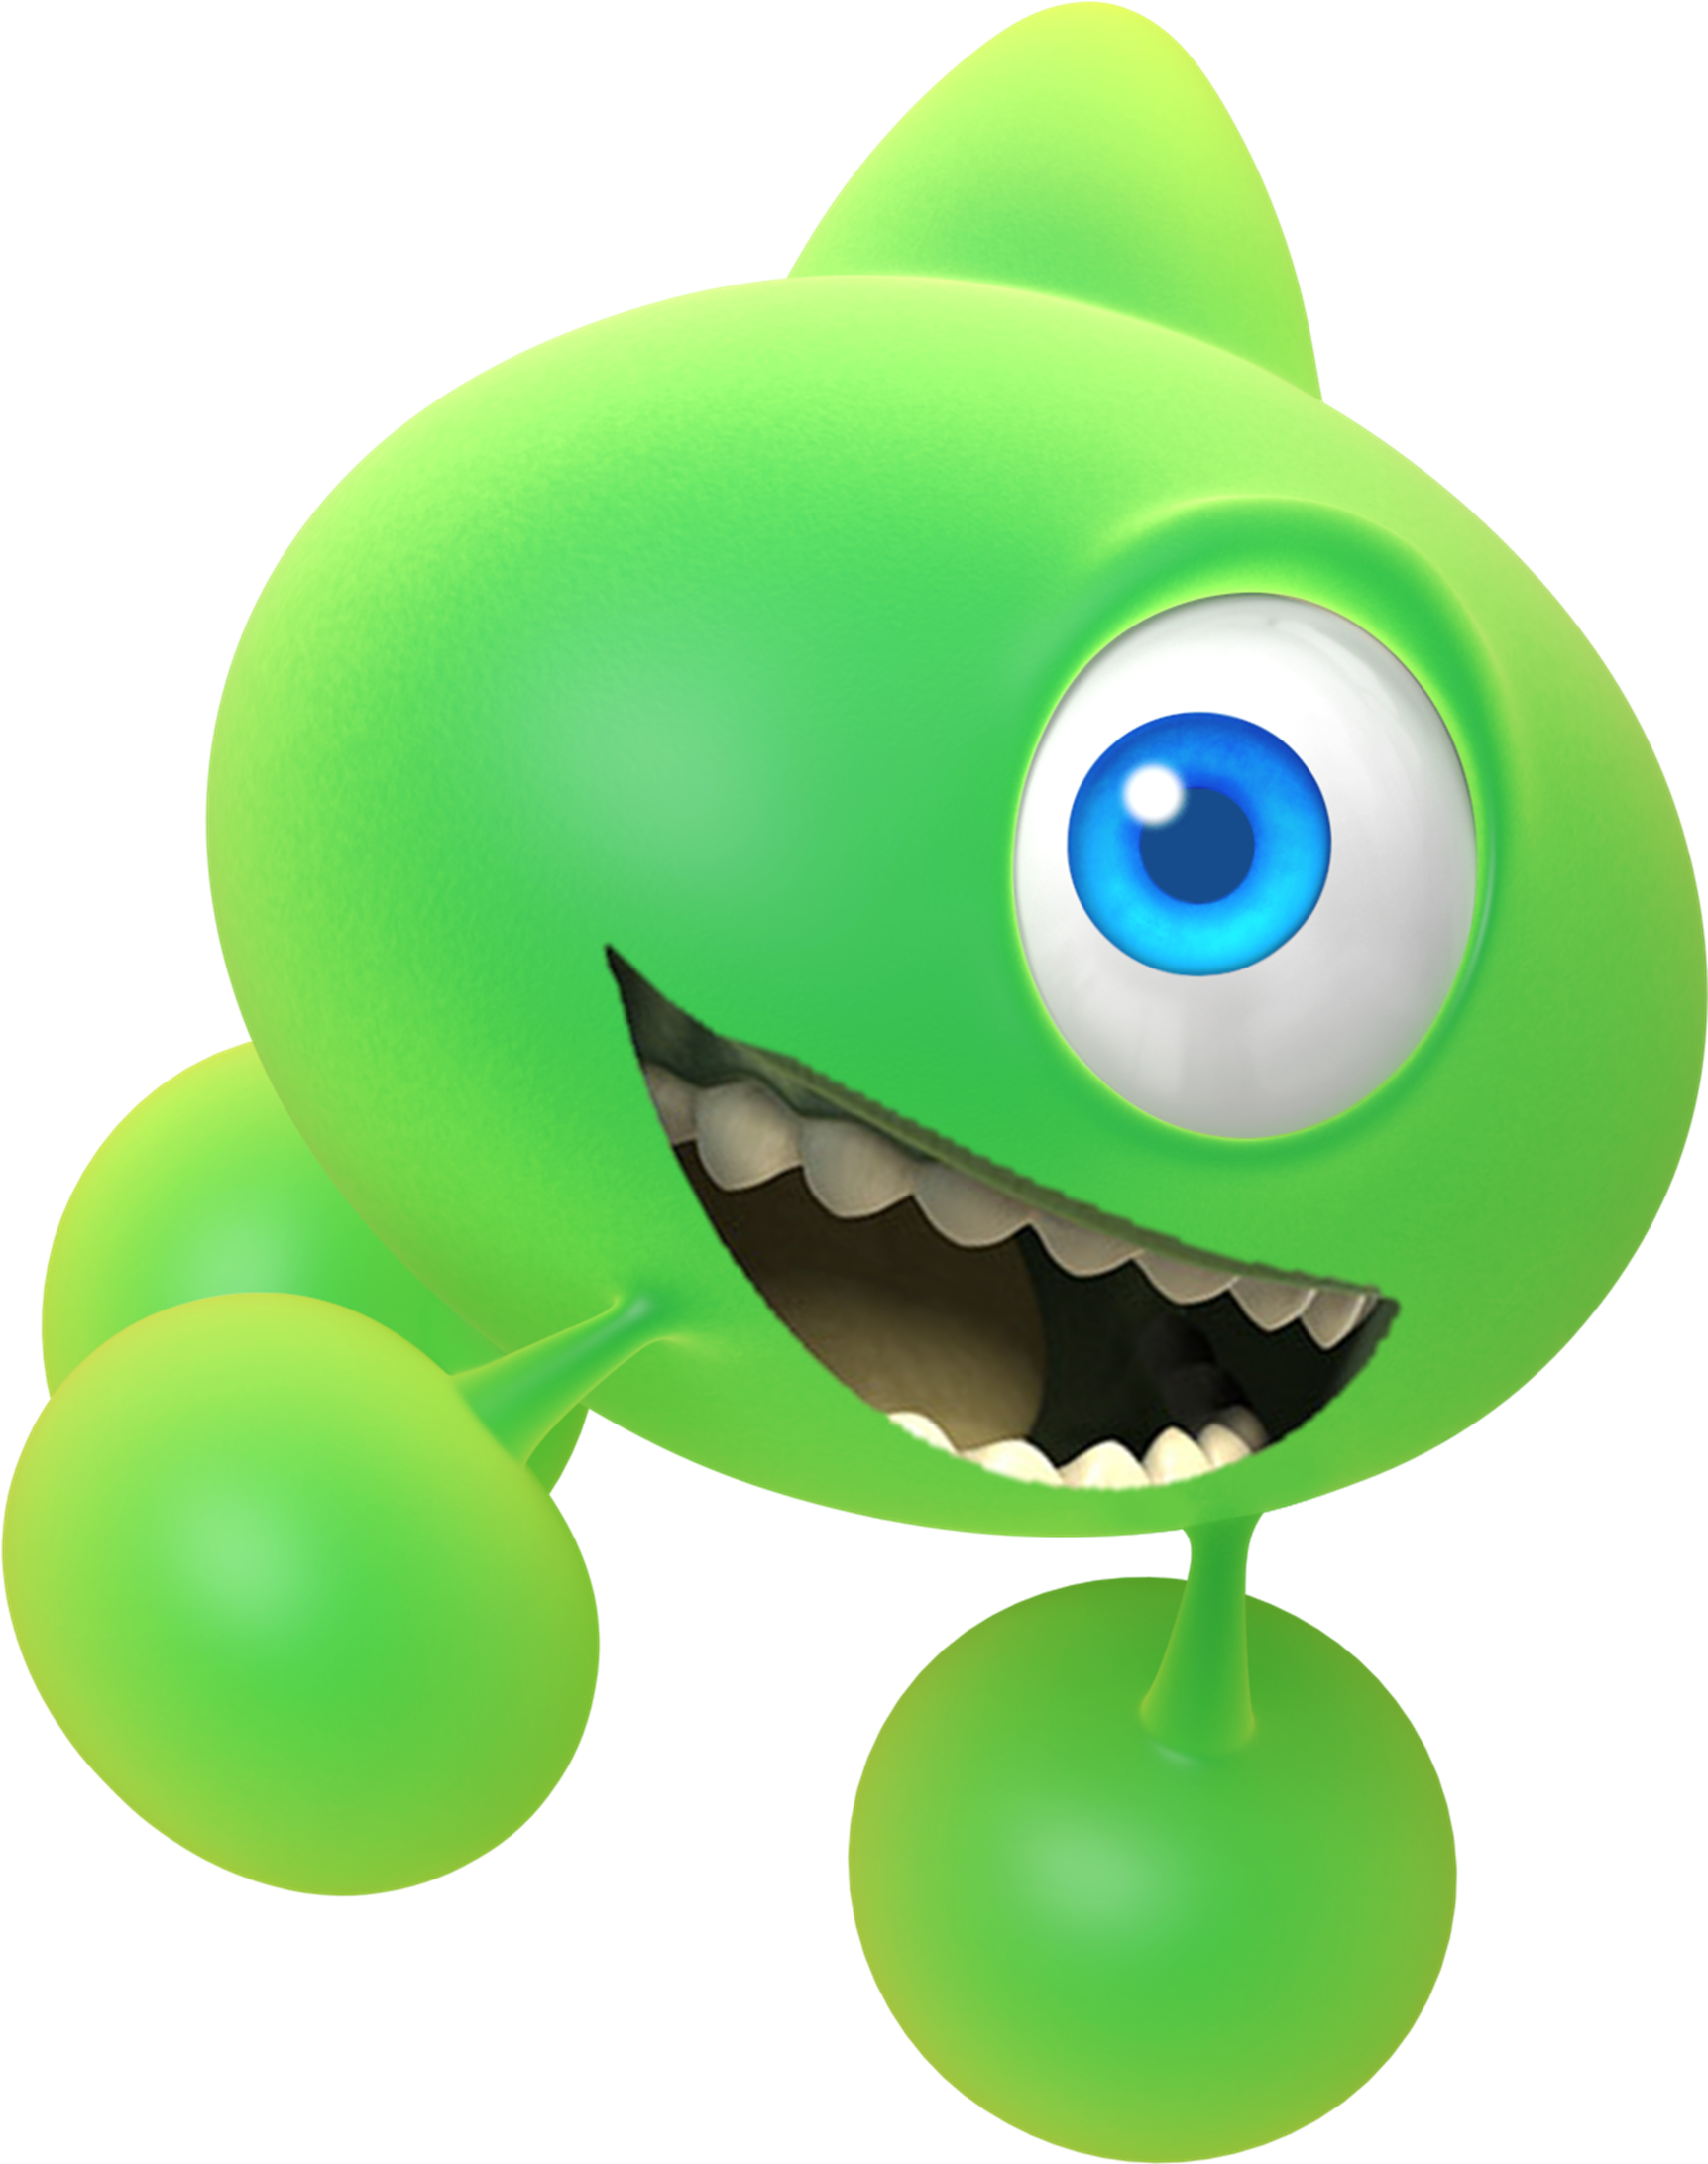 A Green Cartoon Character With A Blue Eye And Mouth